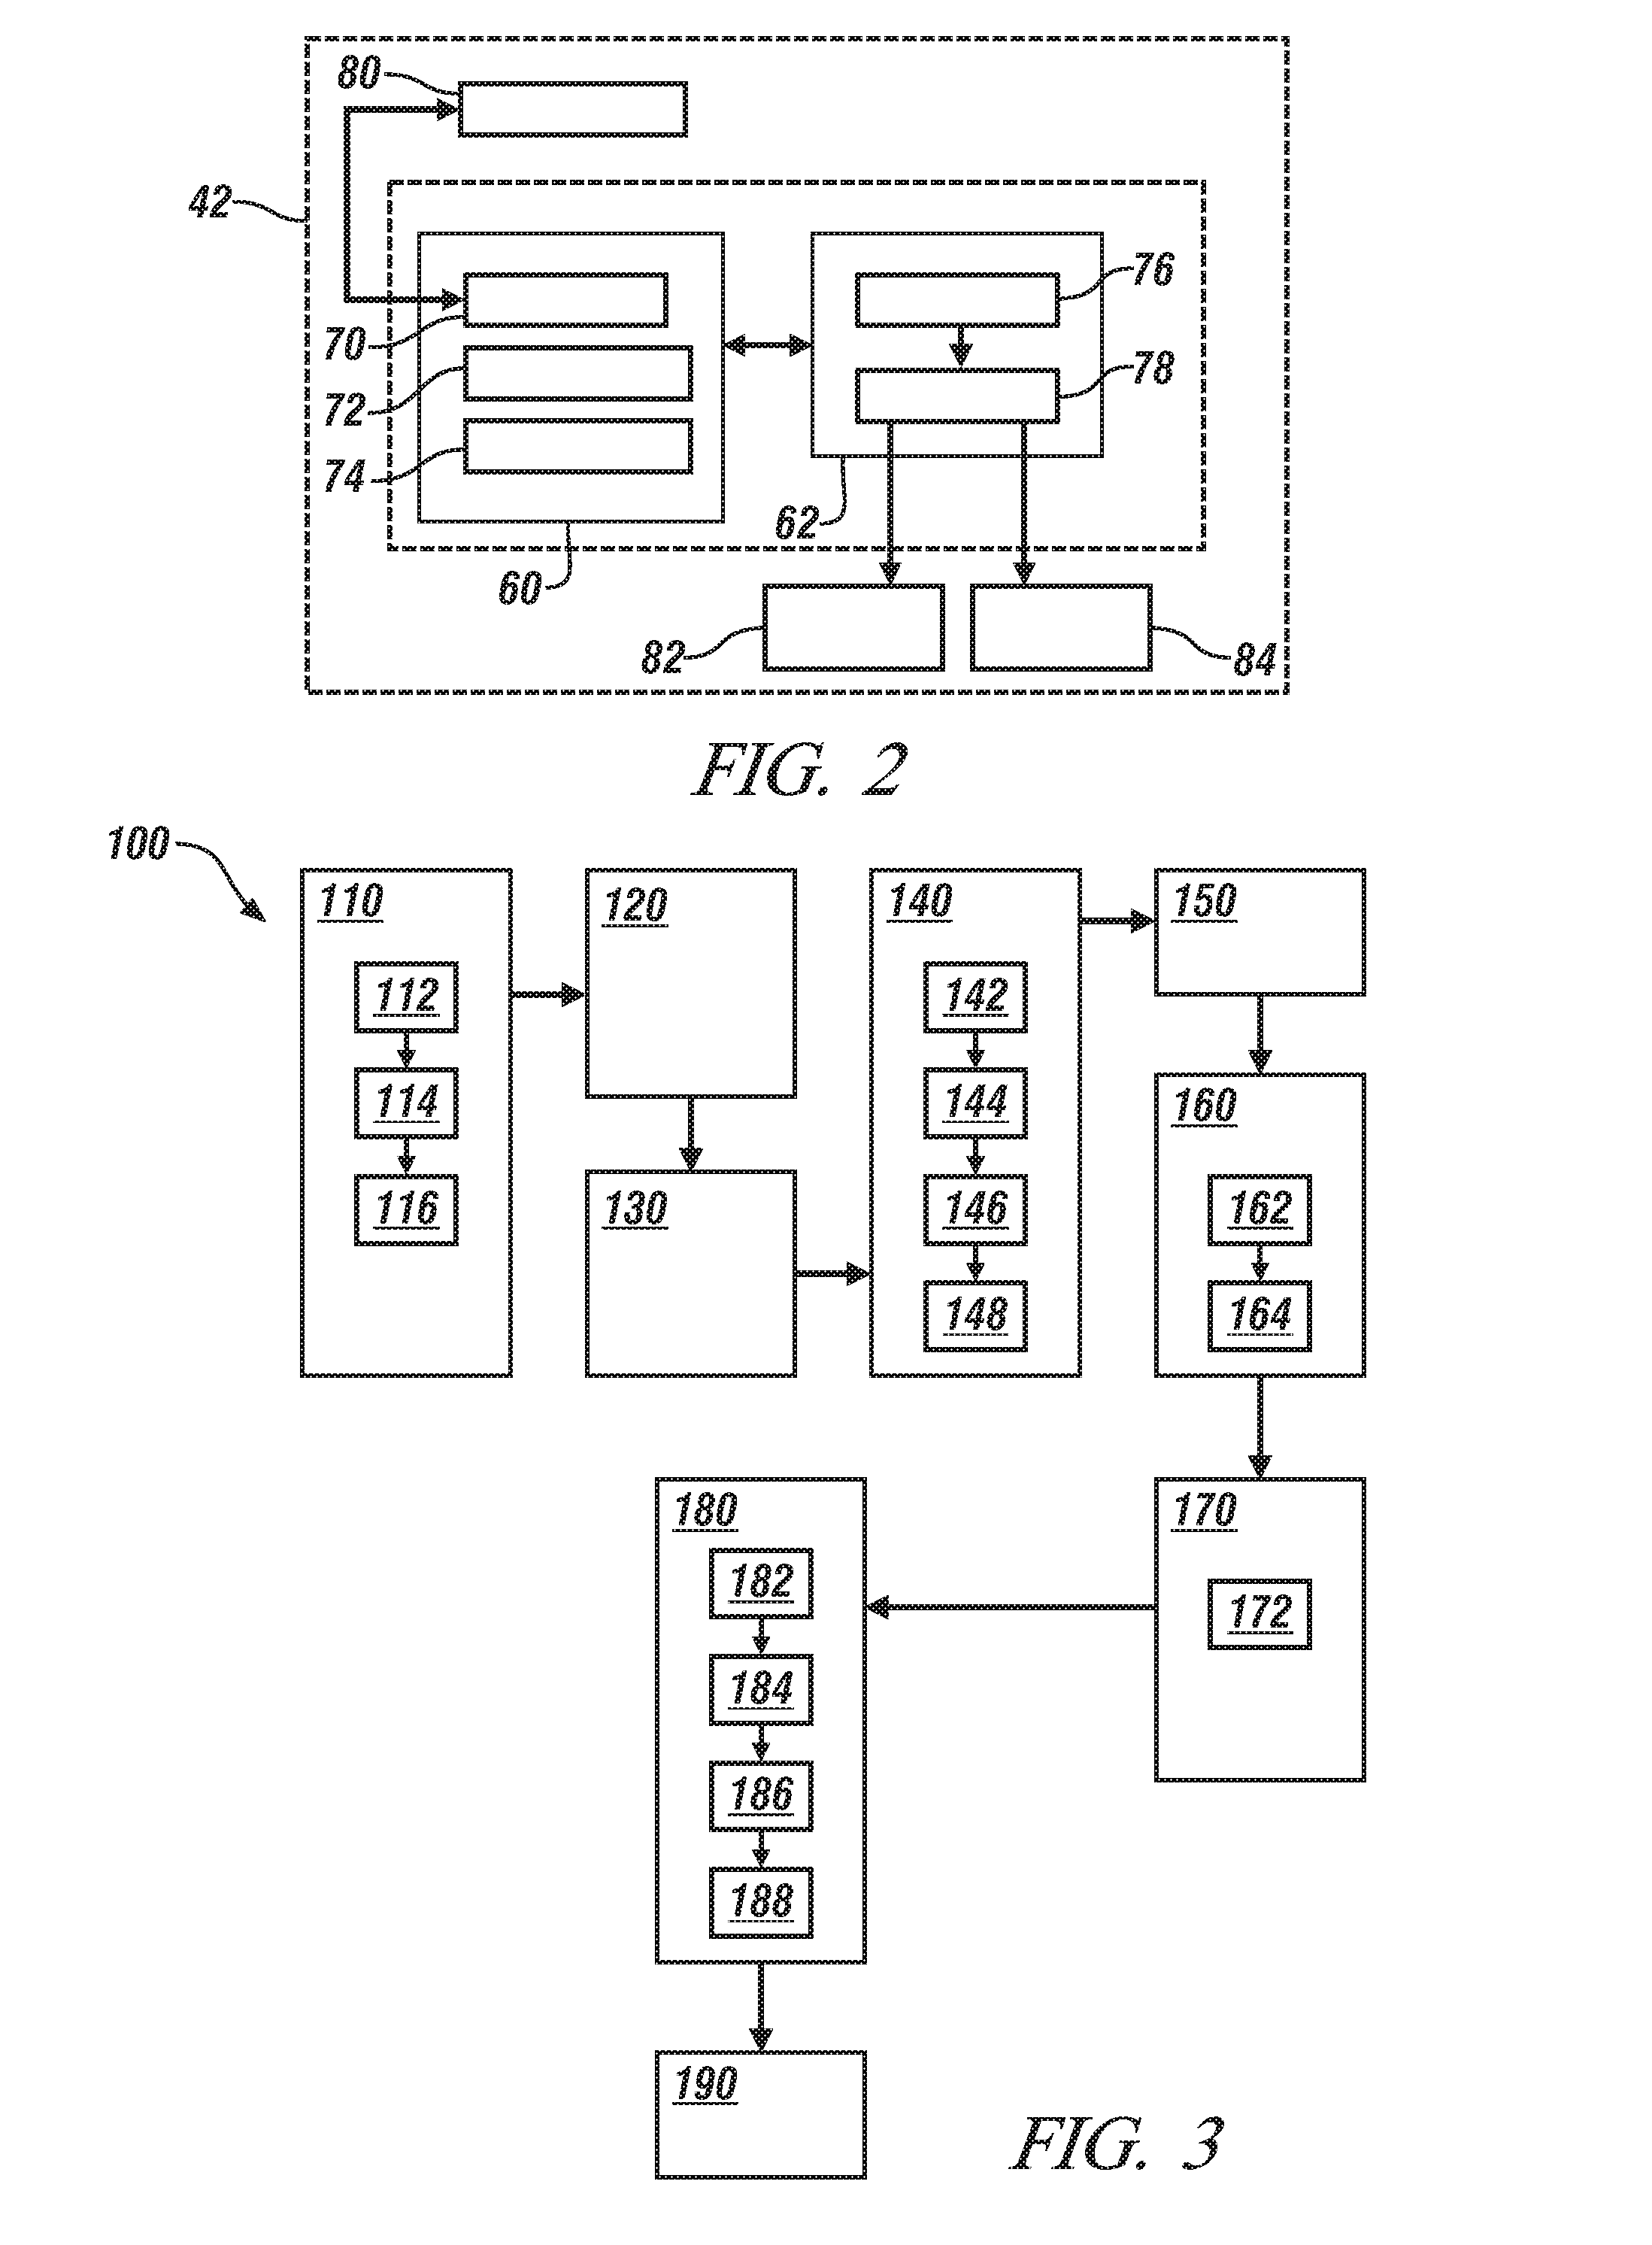 System and method for controlling an exhaust system having a selective catalyst reduction component